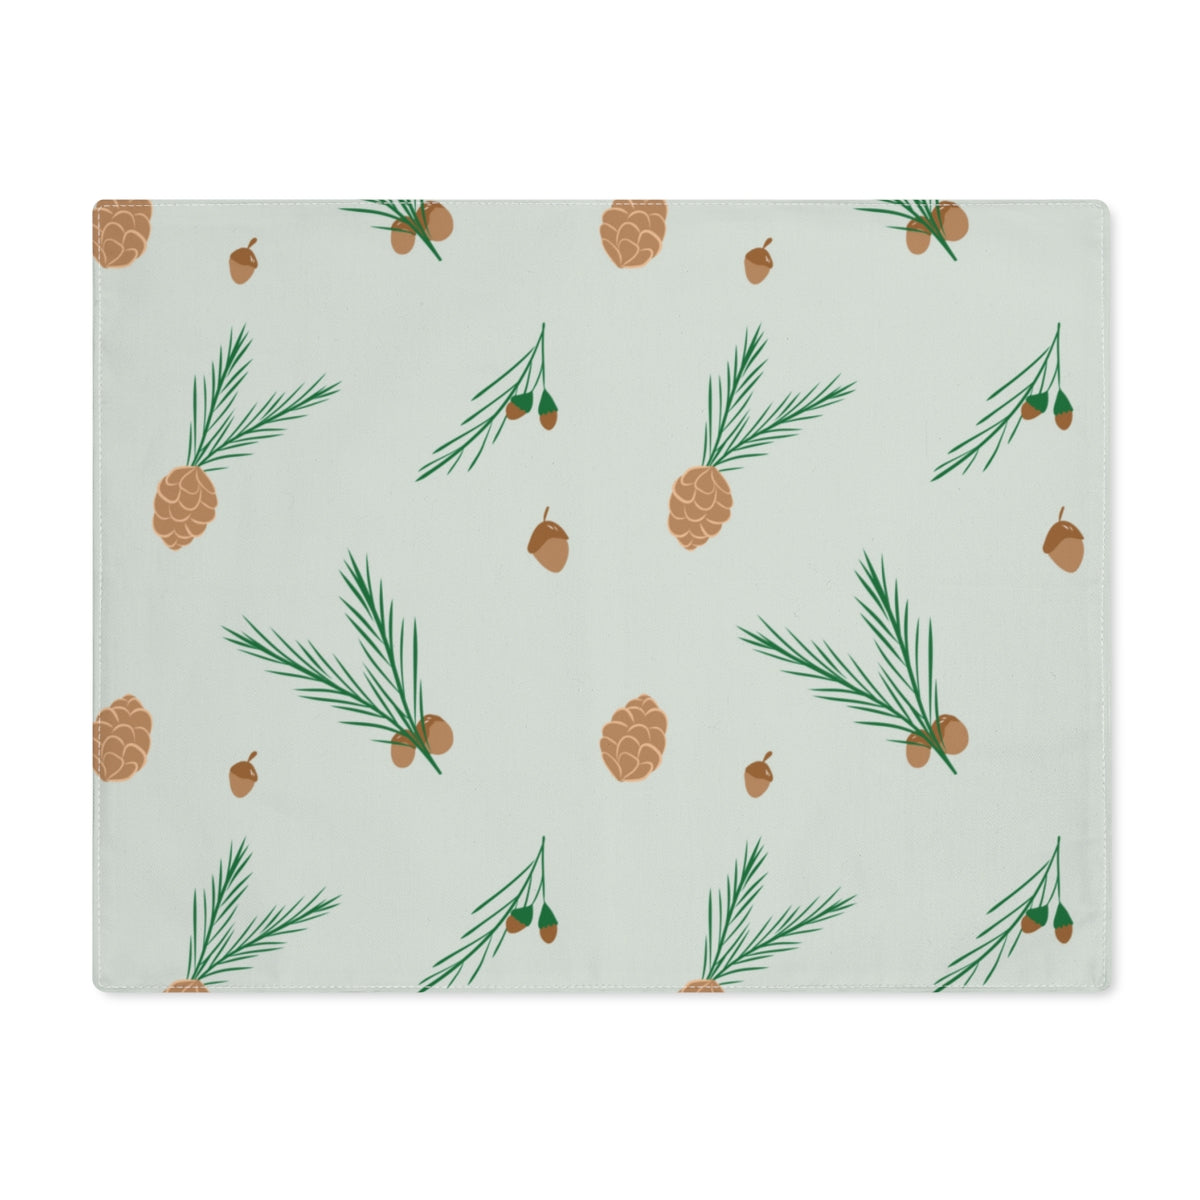 Green Holiday Table Placemat - Pinecones & Acorns